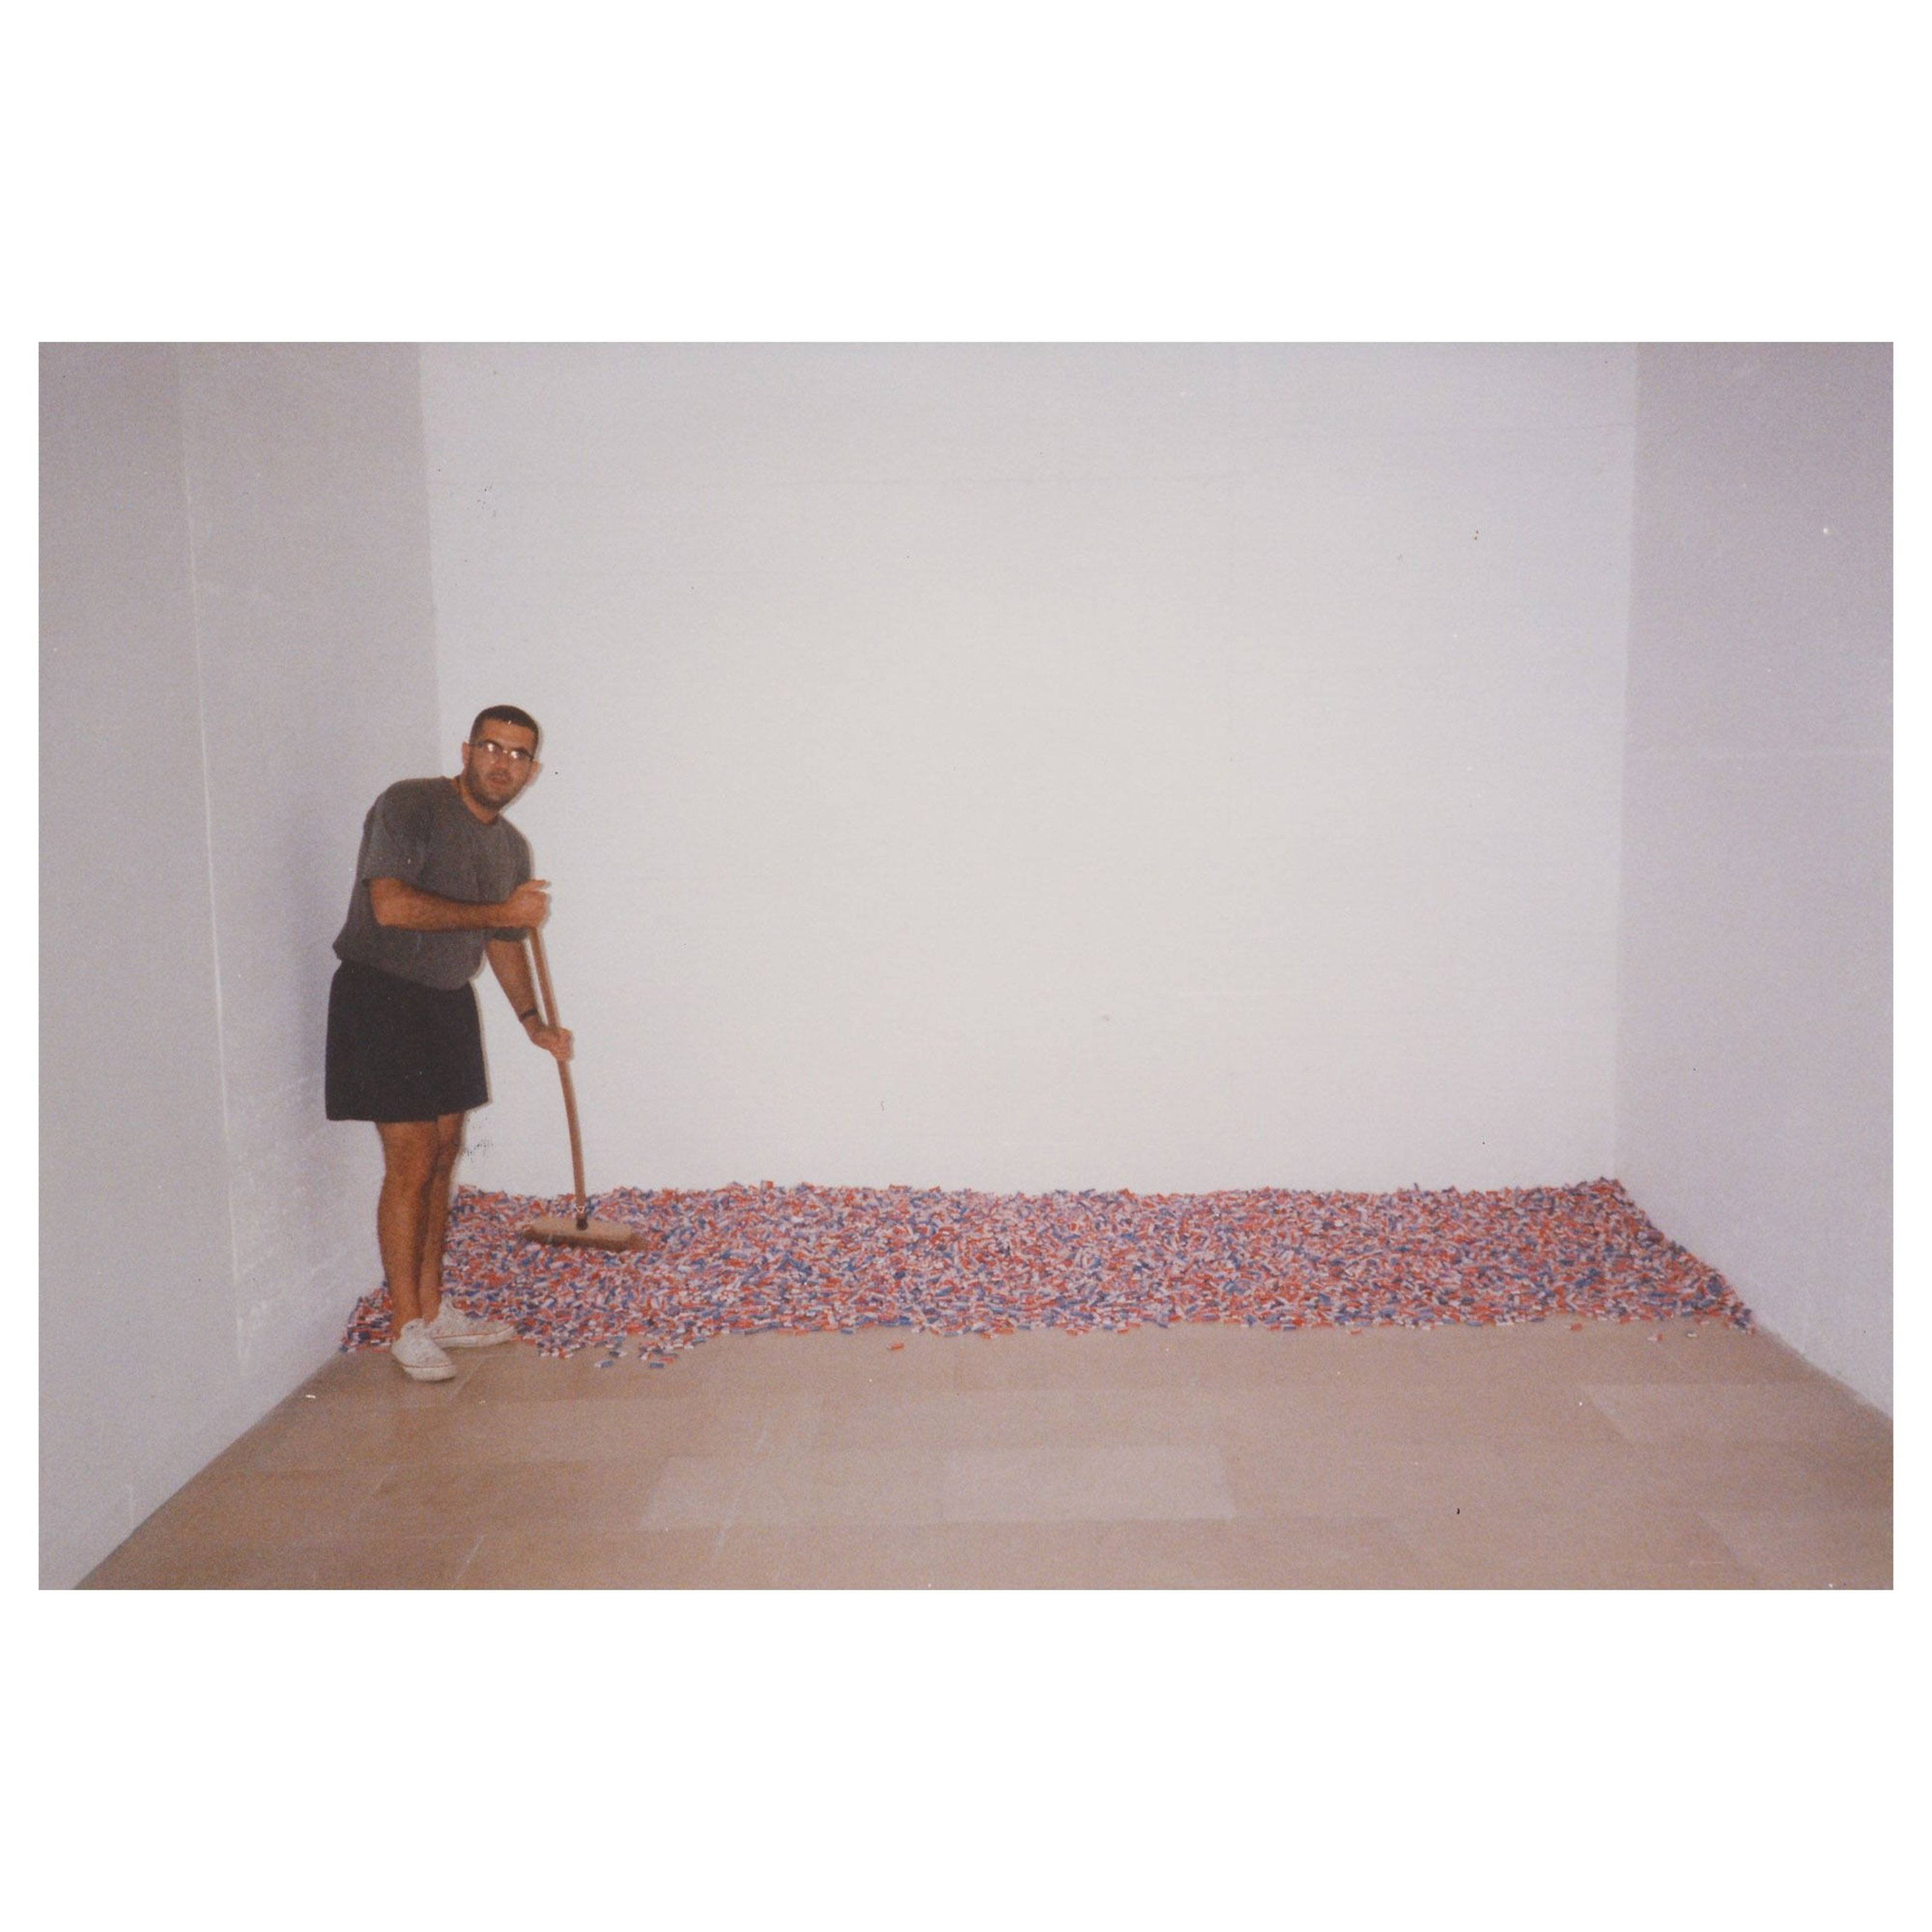 Félix Gonzalez-Torres sweeping the candies on the floor from his Untitled piece